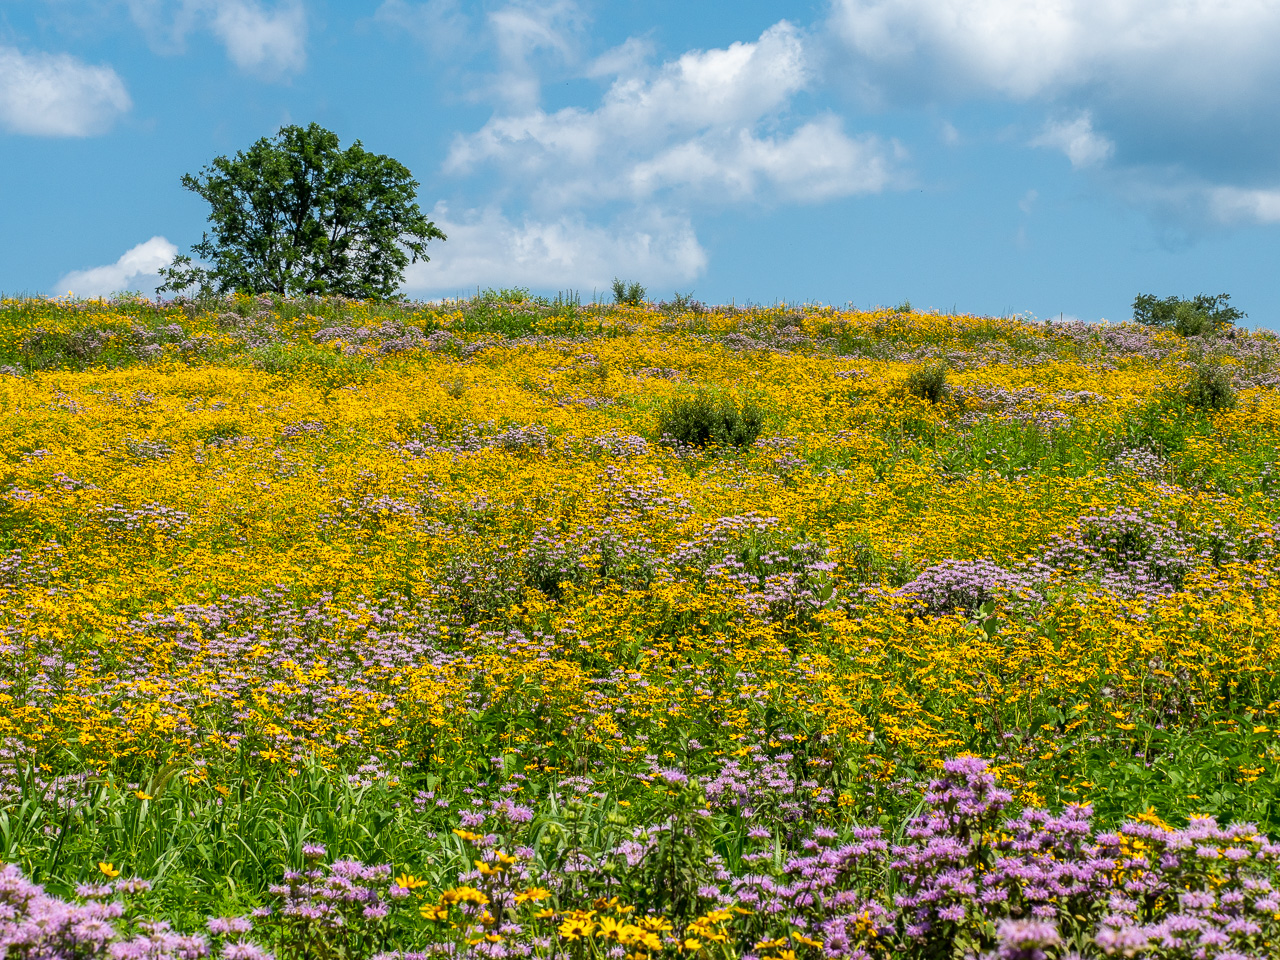 A super colorful large meadow dominated rudbeckia and monarda in full bloom